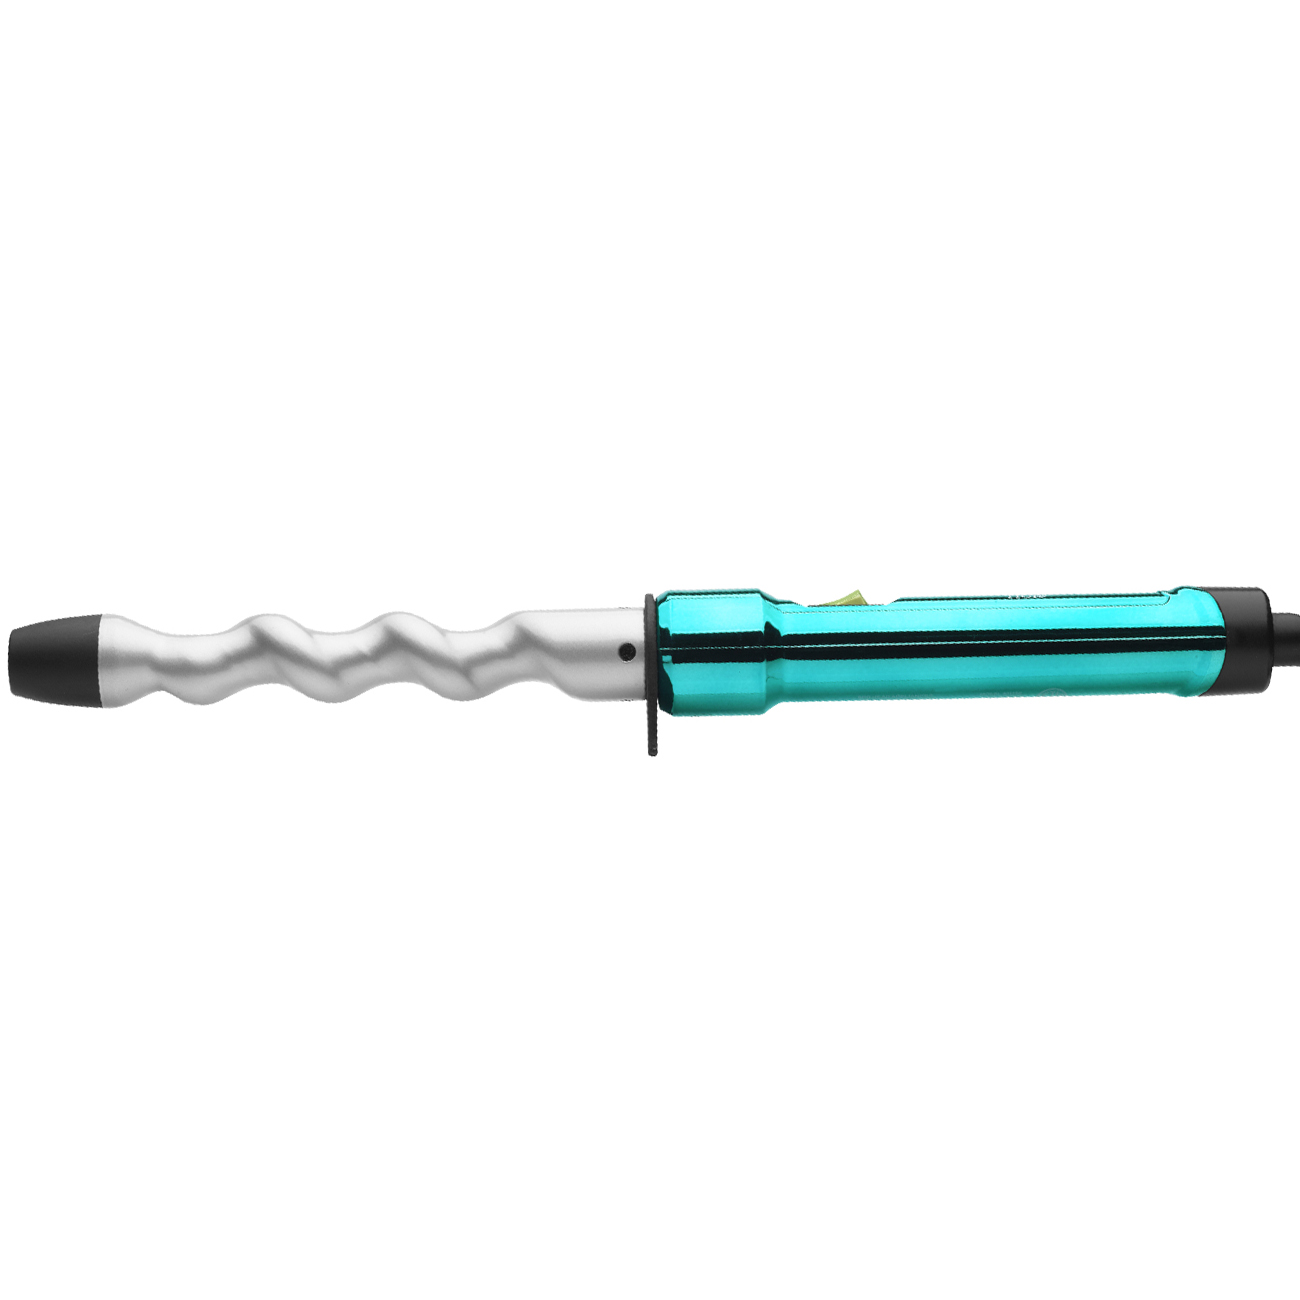 Bed Head Curlipops 1" Tourmaline + Ceramic Spiral Curling Wand, Turquoise - image 4 of 7